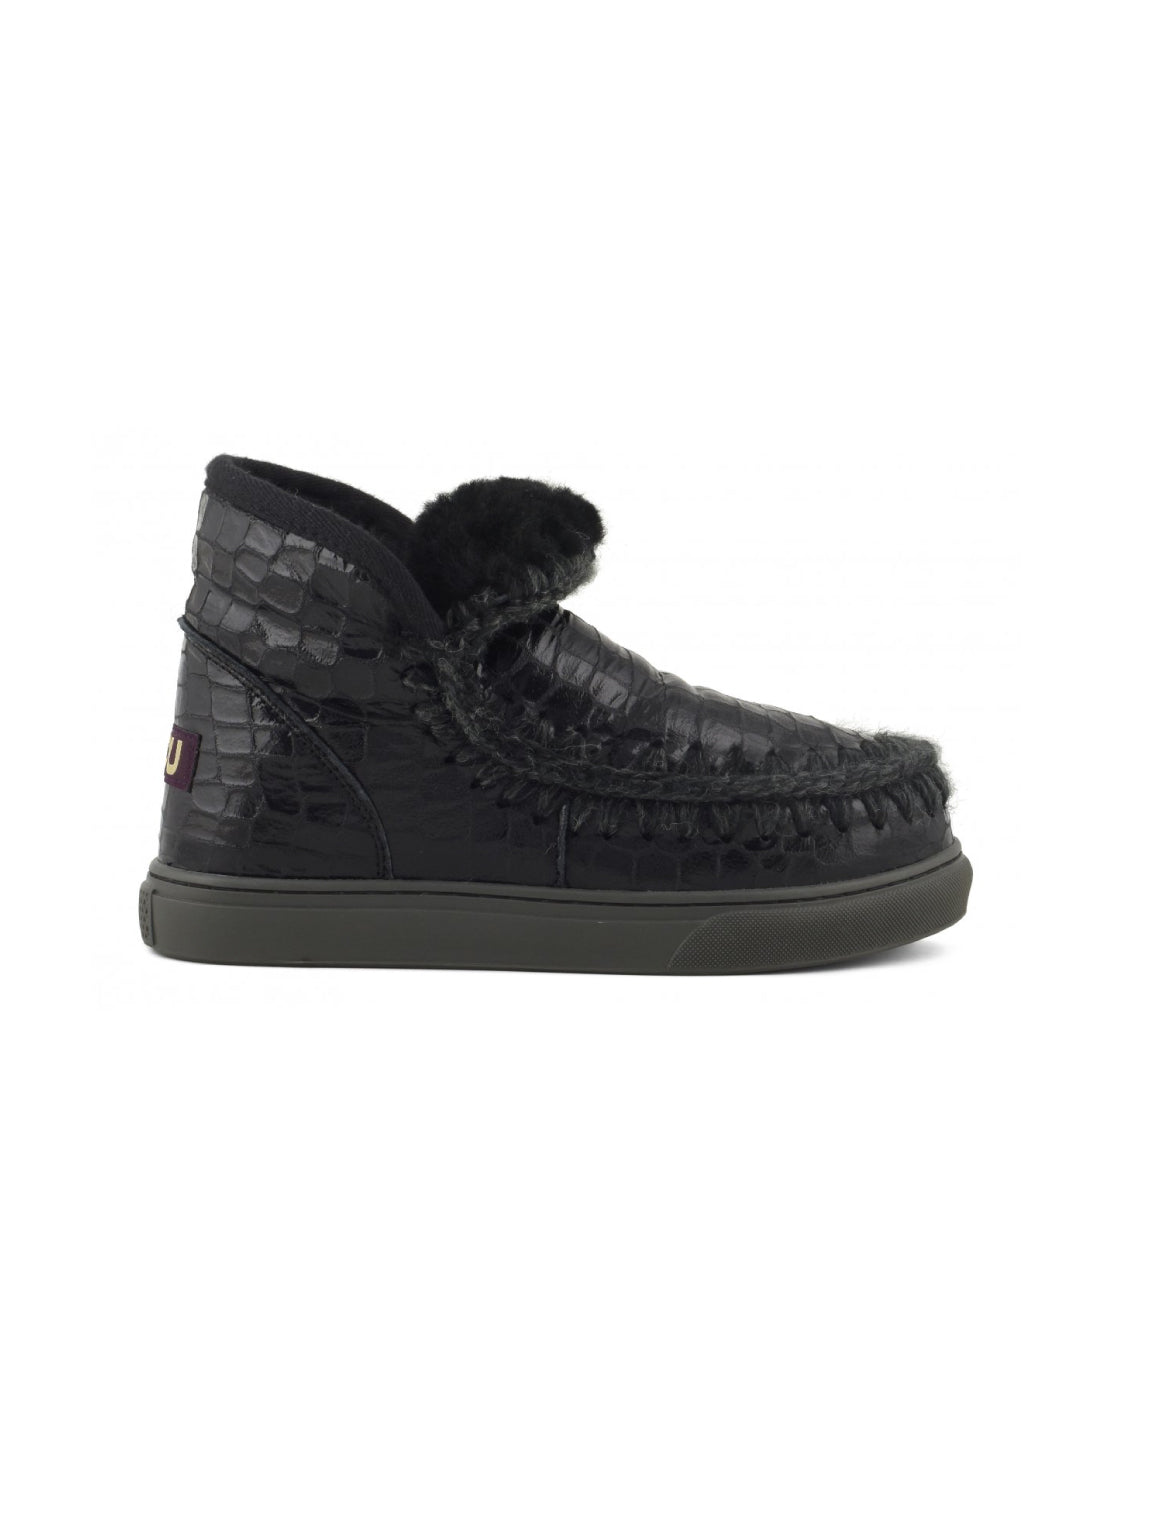 Croc Print Ankle Boot with Sneaker Sole - Black